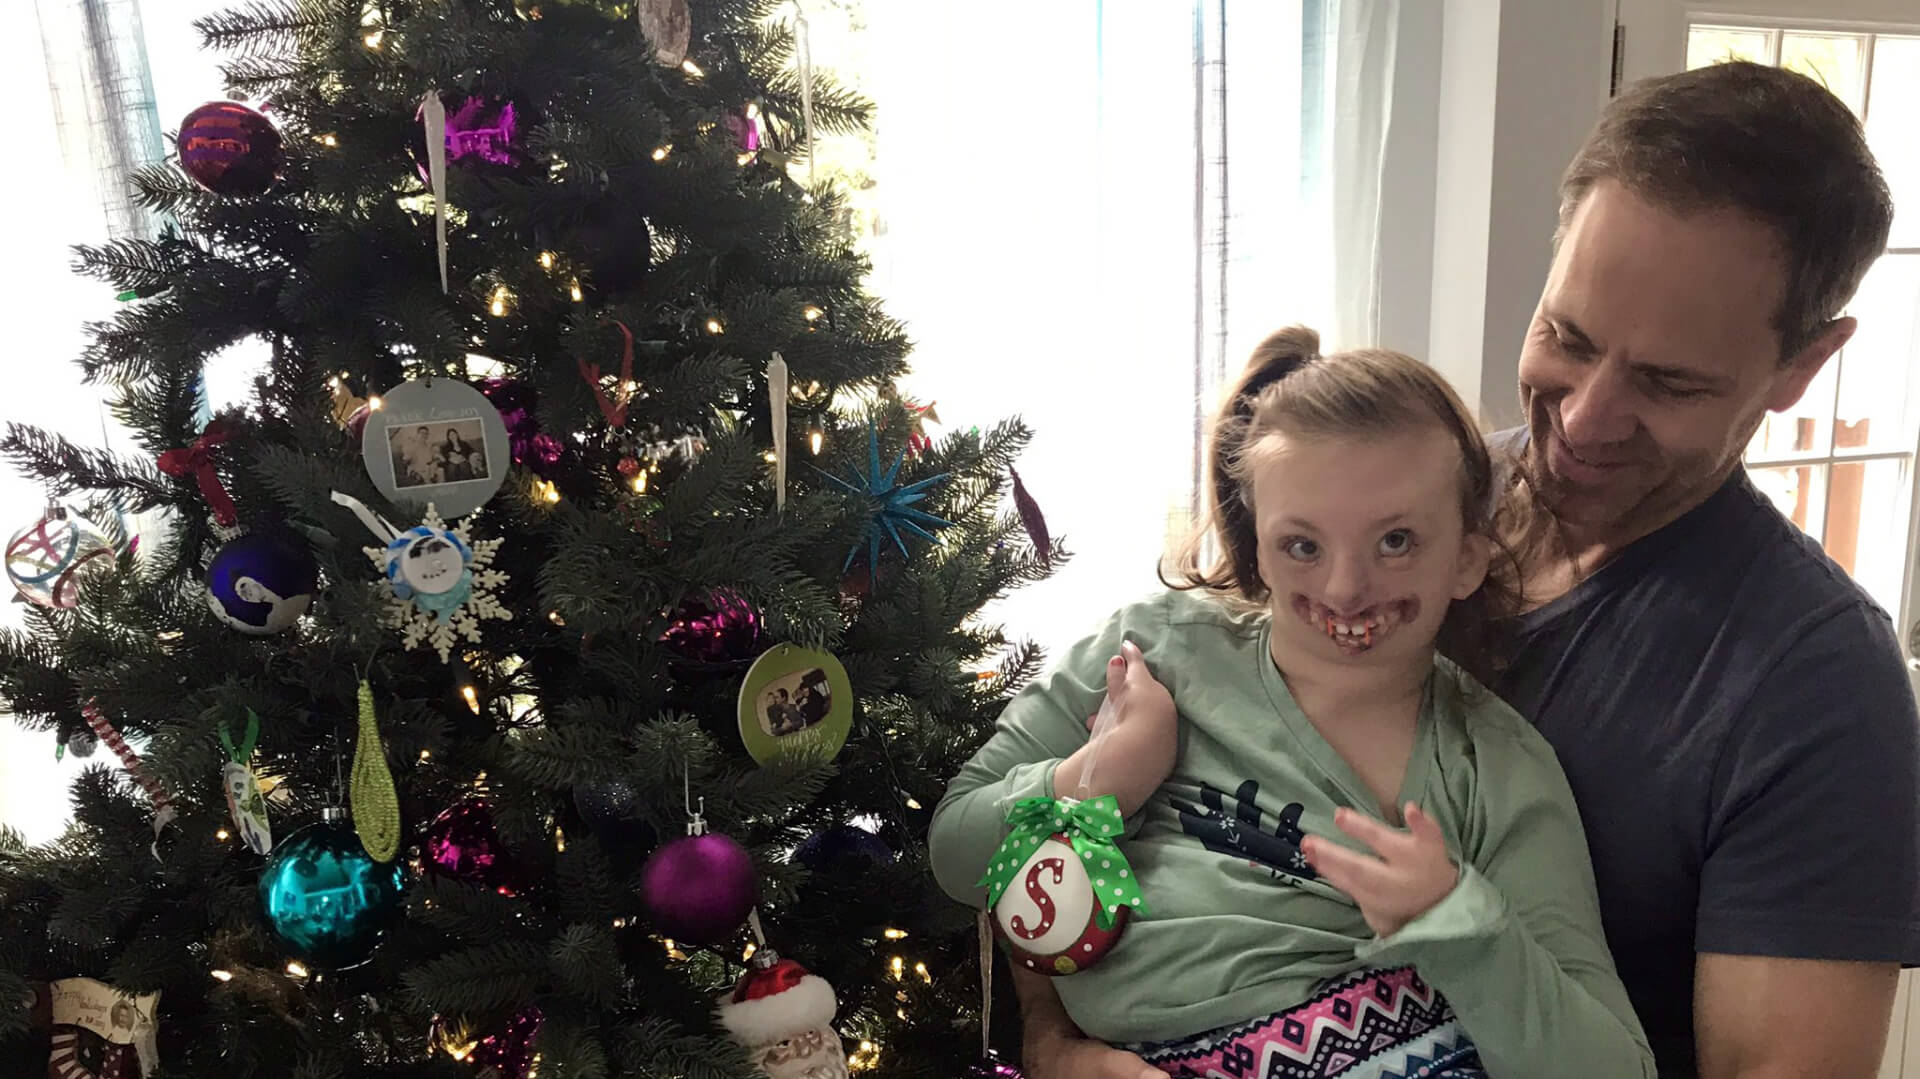 Born with a number of debilitating health conditions, Sophia Weaver is still just like any 10-year-old in many ways. As we look back on 2018, read our favorite stories about some of our Levine Children’s Hospital patients like Sophia and many others. 